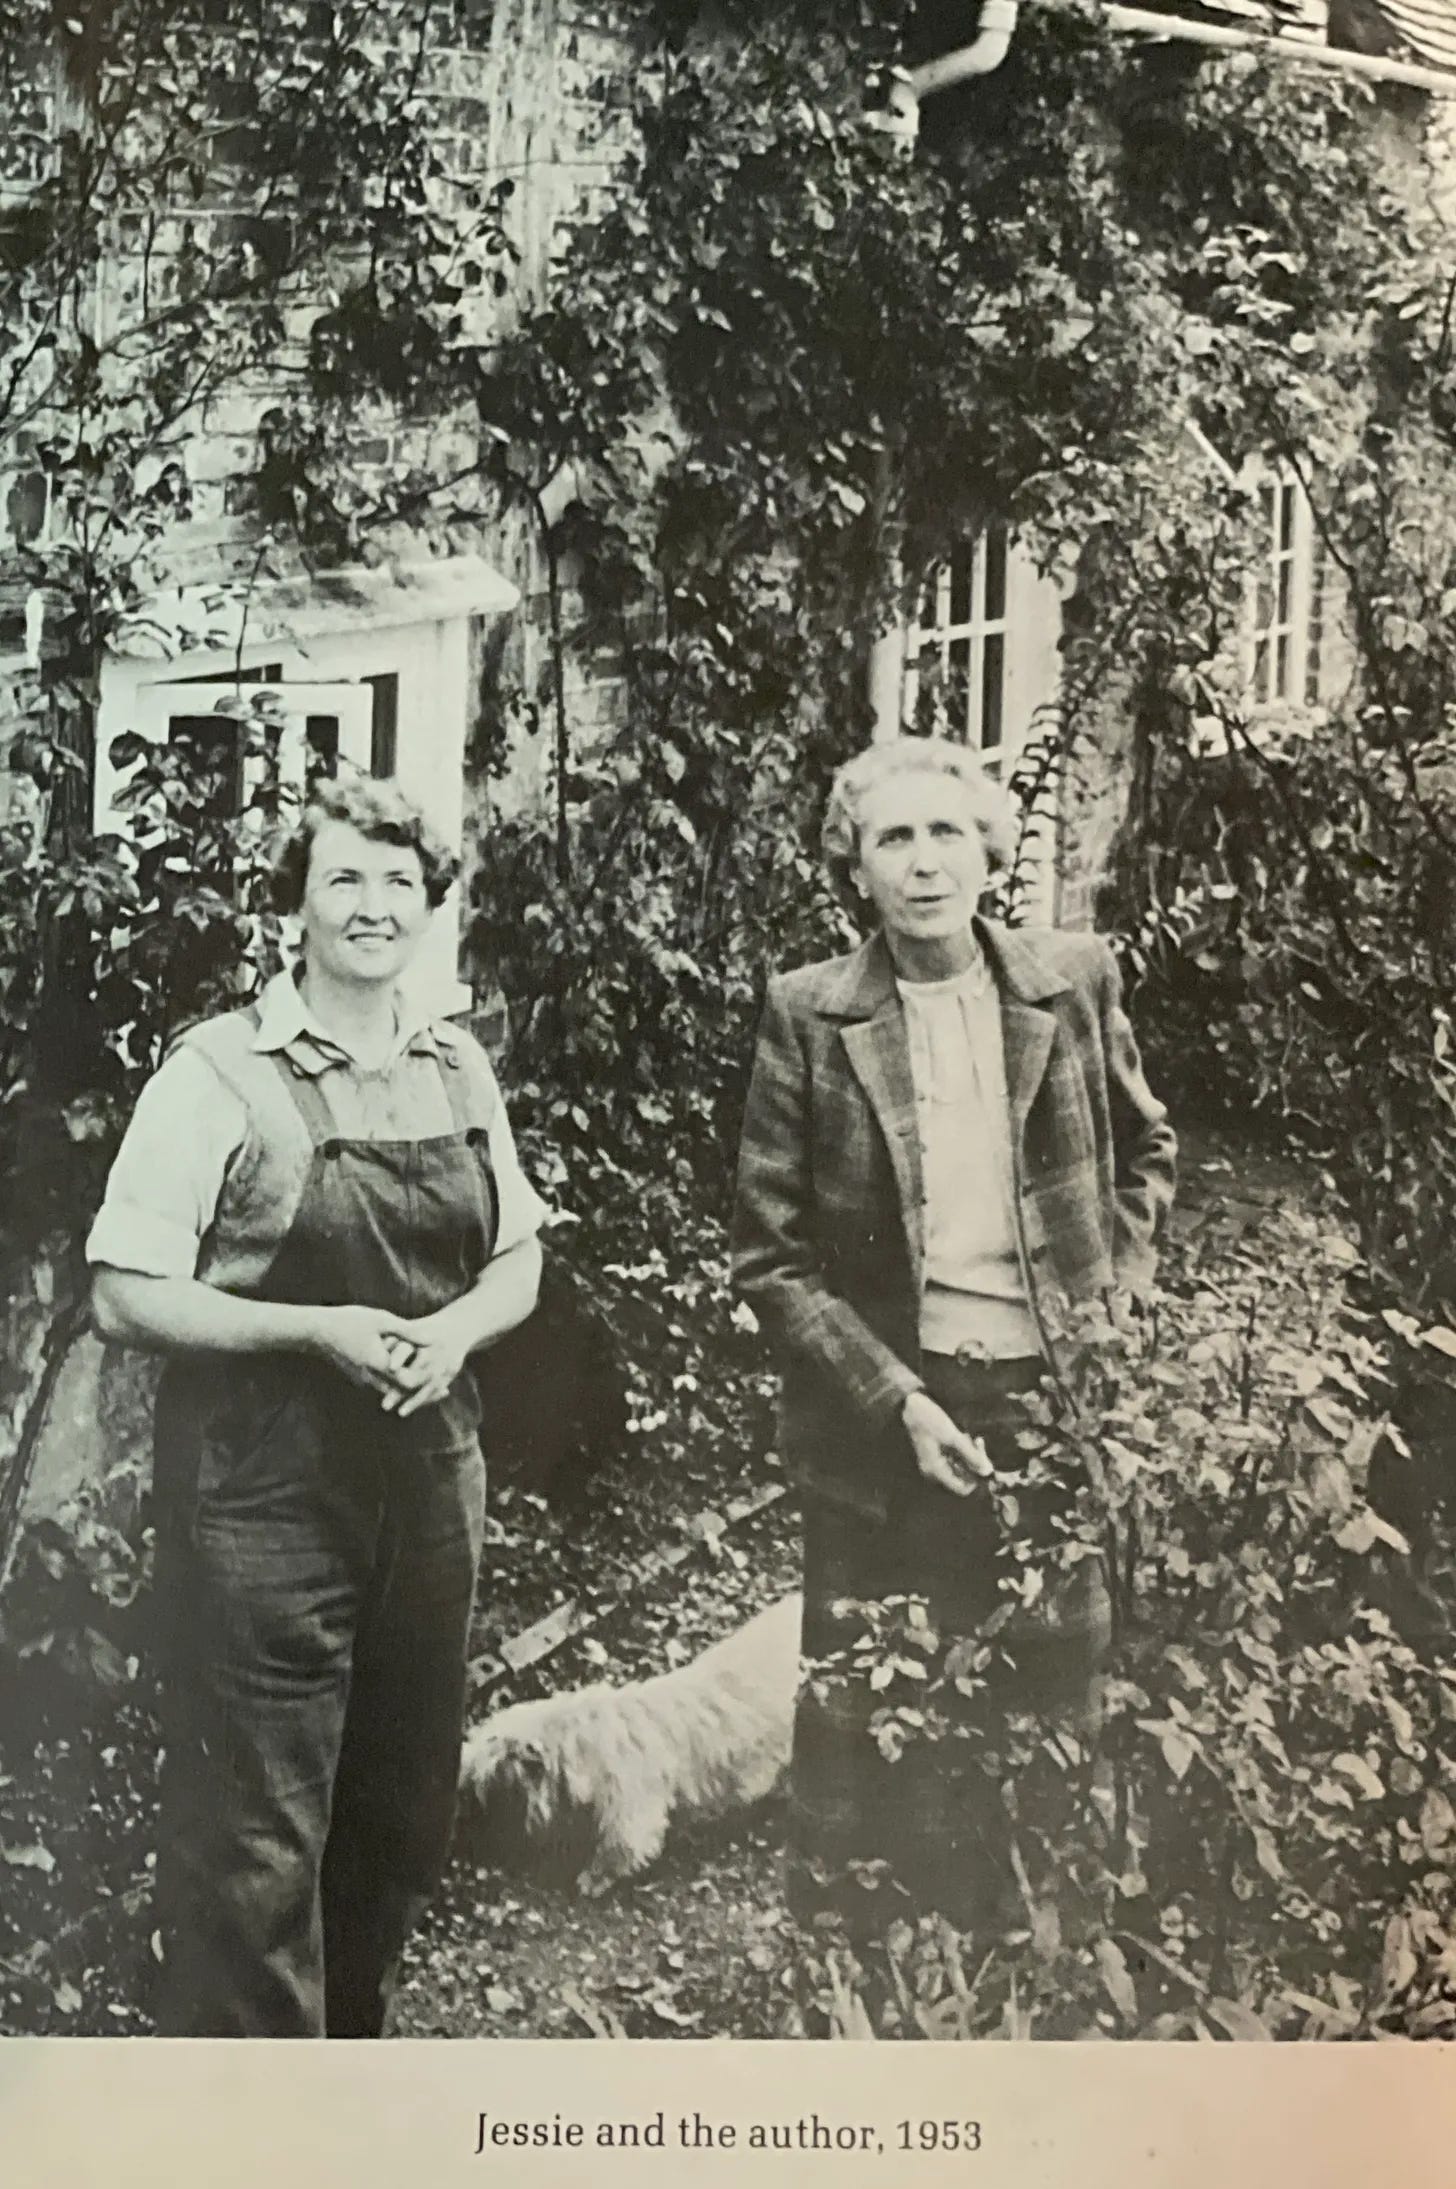 Elizabeth Goudge and Jessie Monroe in 1953 at Rose Cottage, Oxfordshire